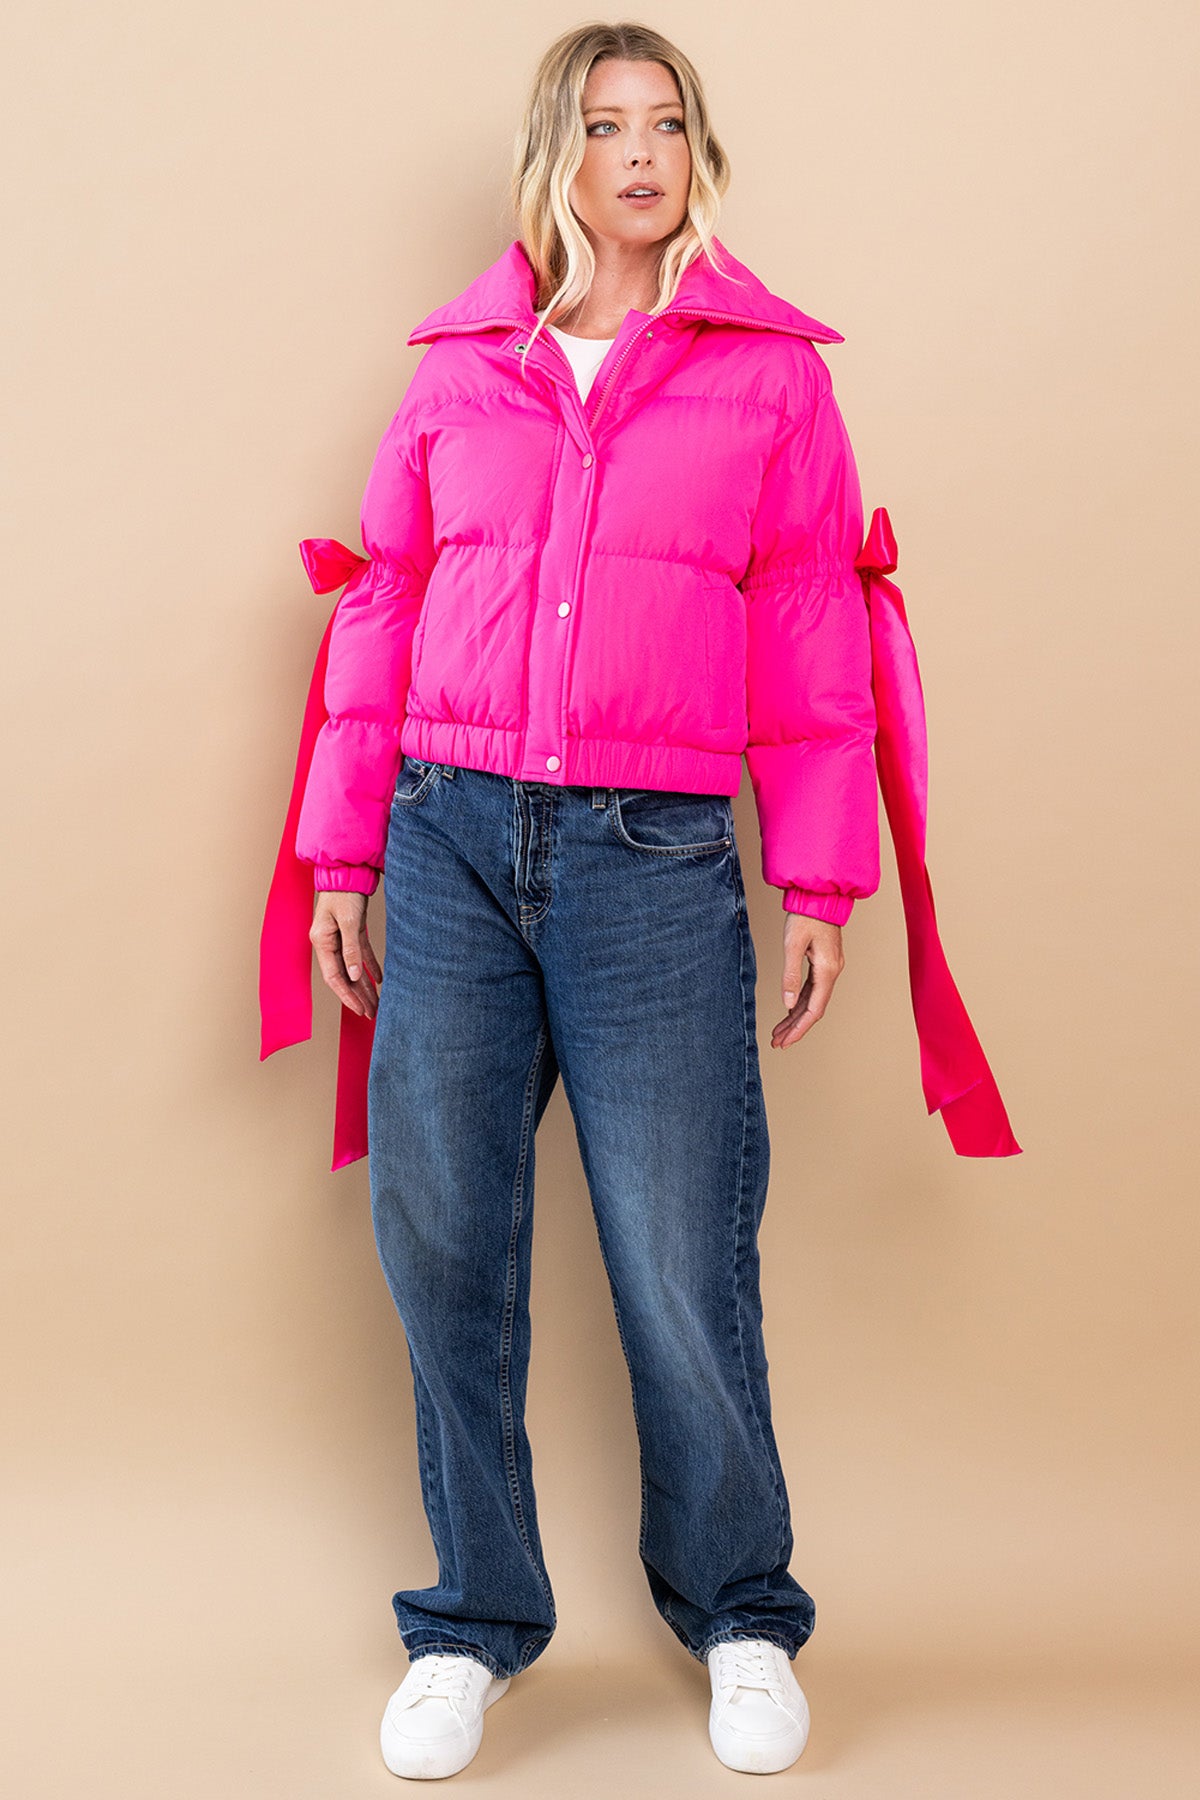 Collared, puffer jacket in fuchsia  with bow knot elbow string.  full view